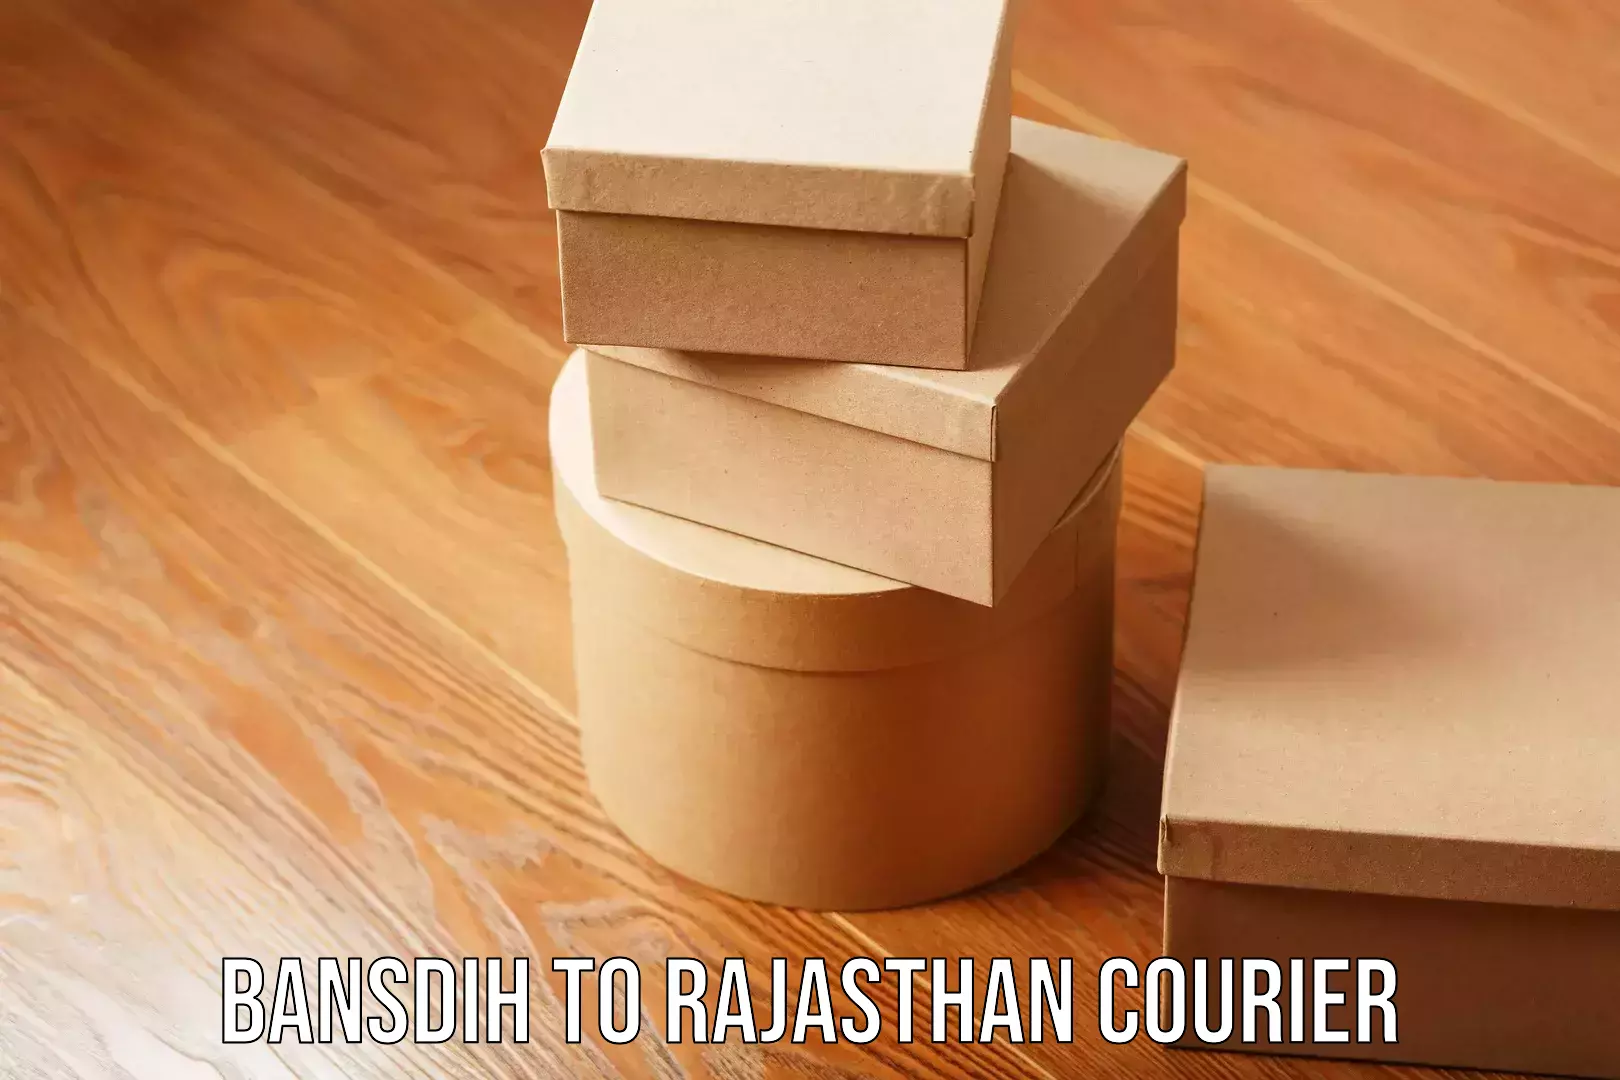 Nationwide courier service Bansdih to Rajasthan